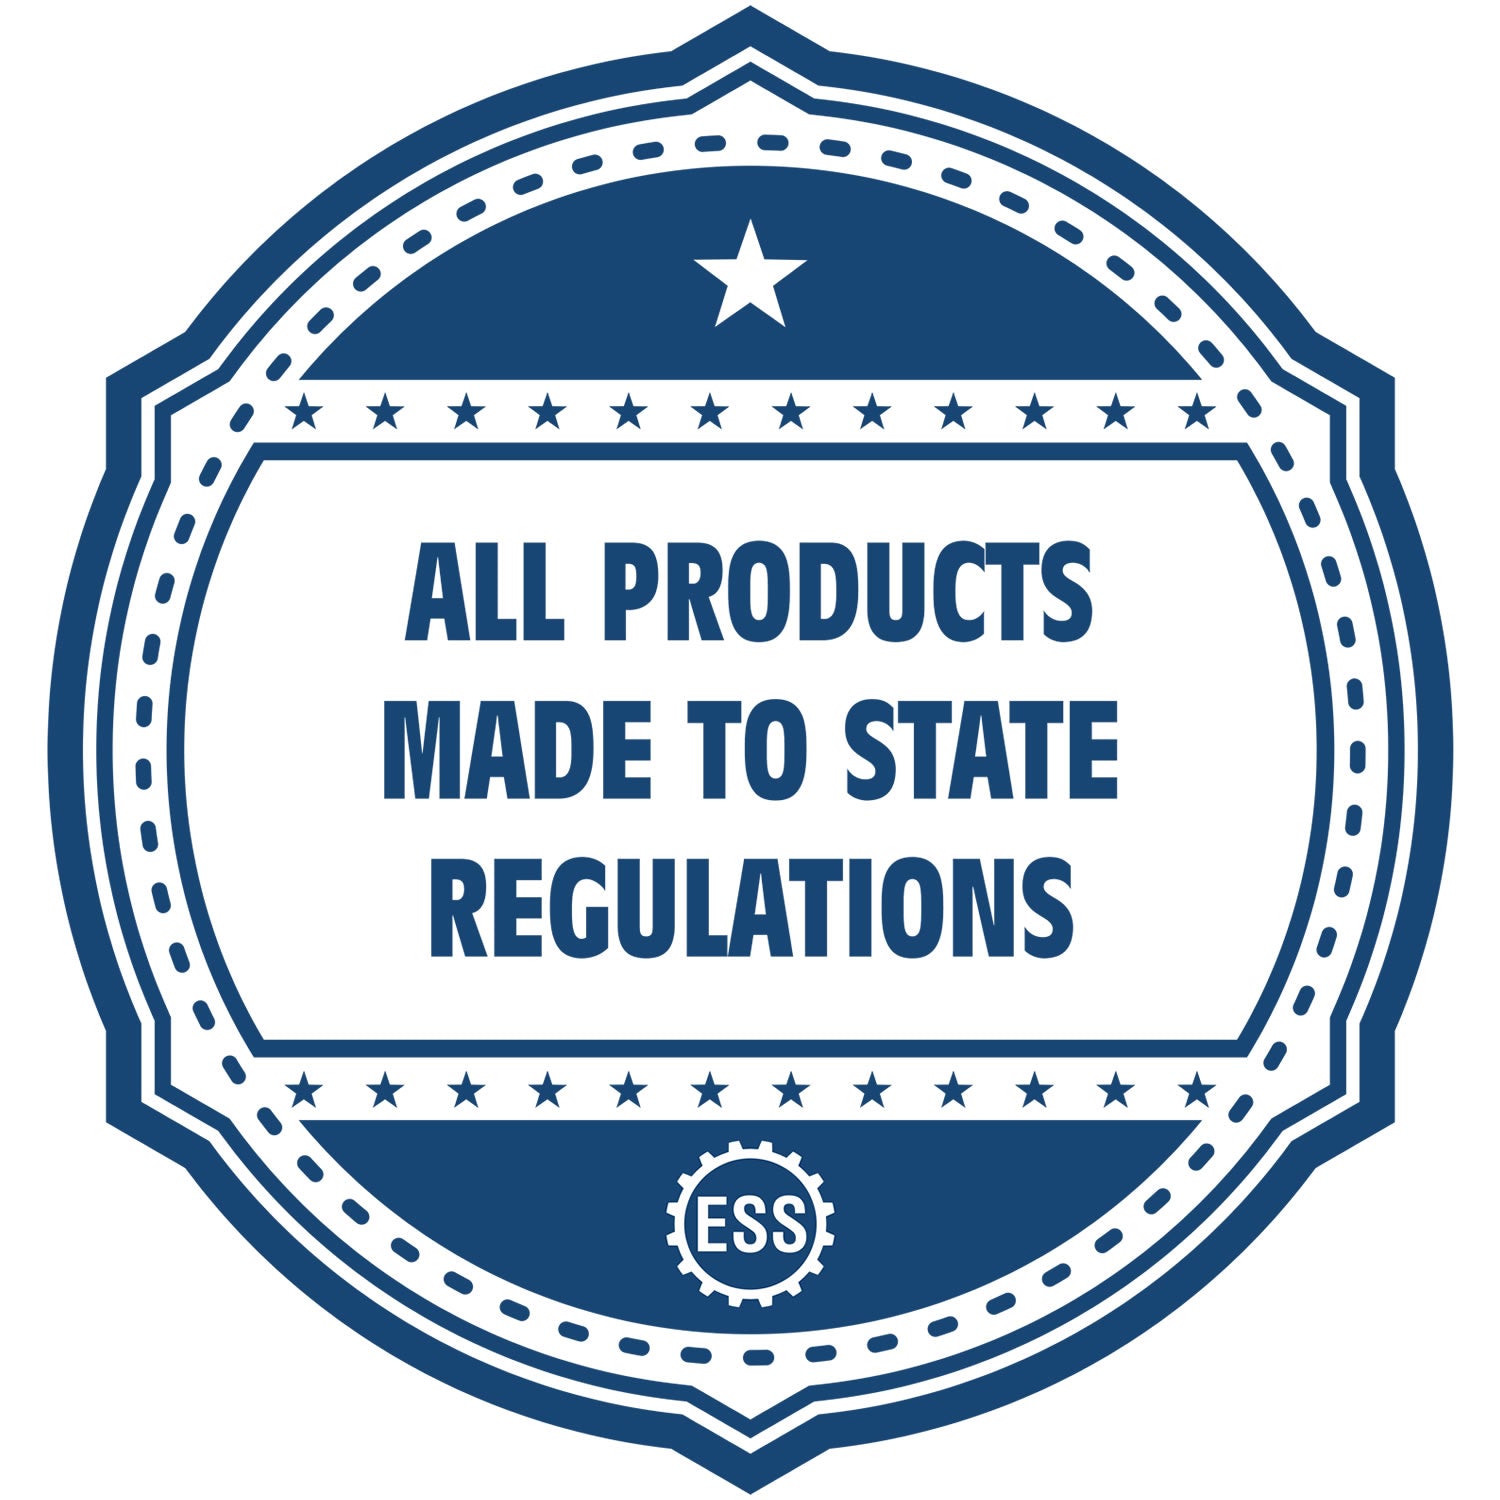 An icon or badge element for the Handheld Tennessee Land Surveyor Seal showing that this product is made in compliance with state regulations.